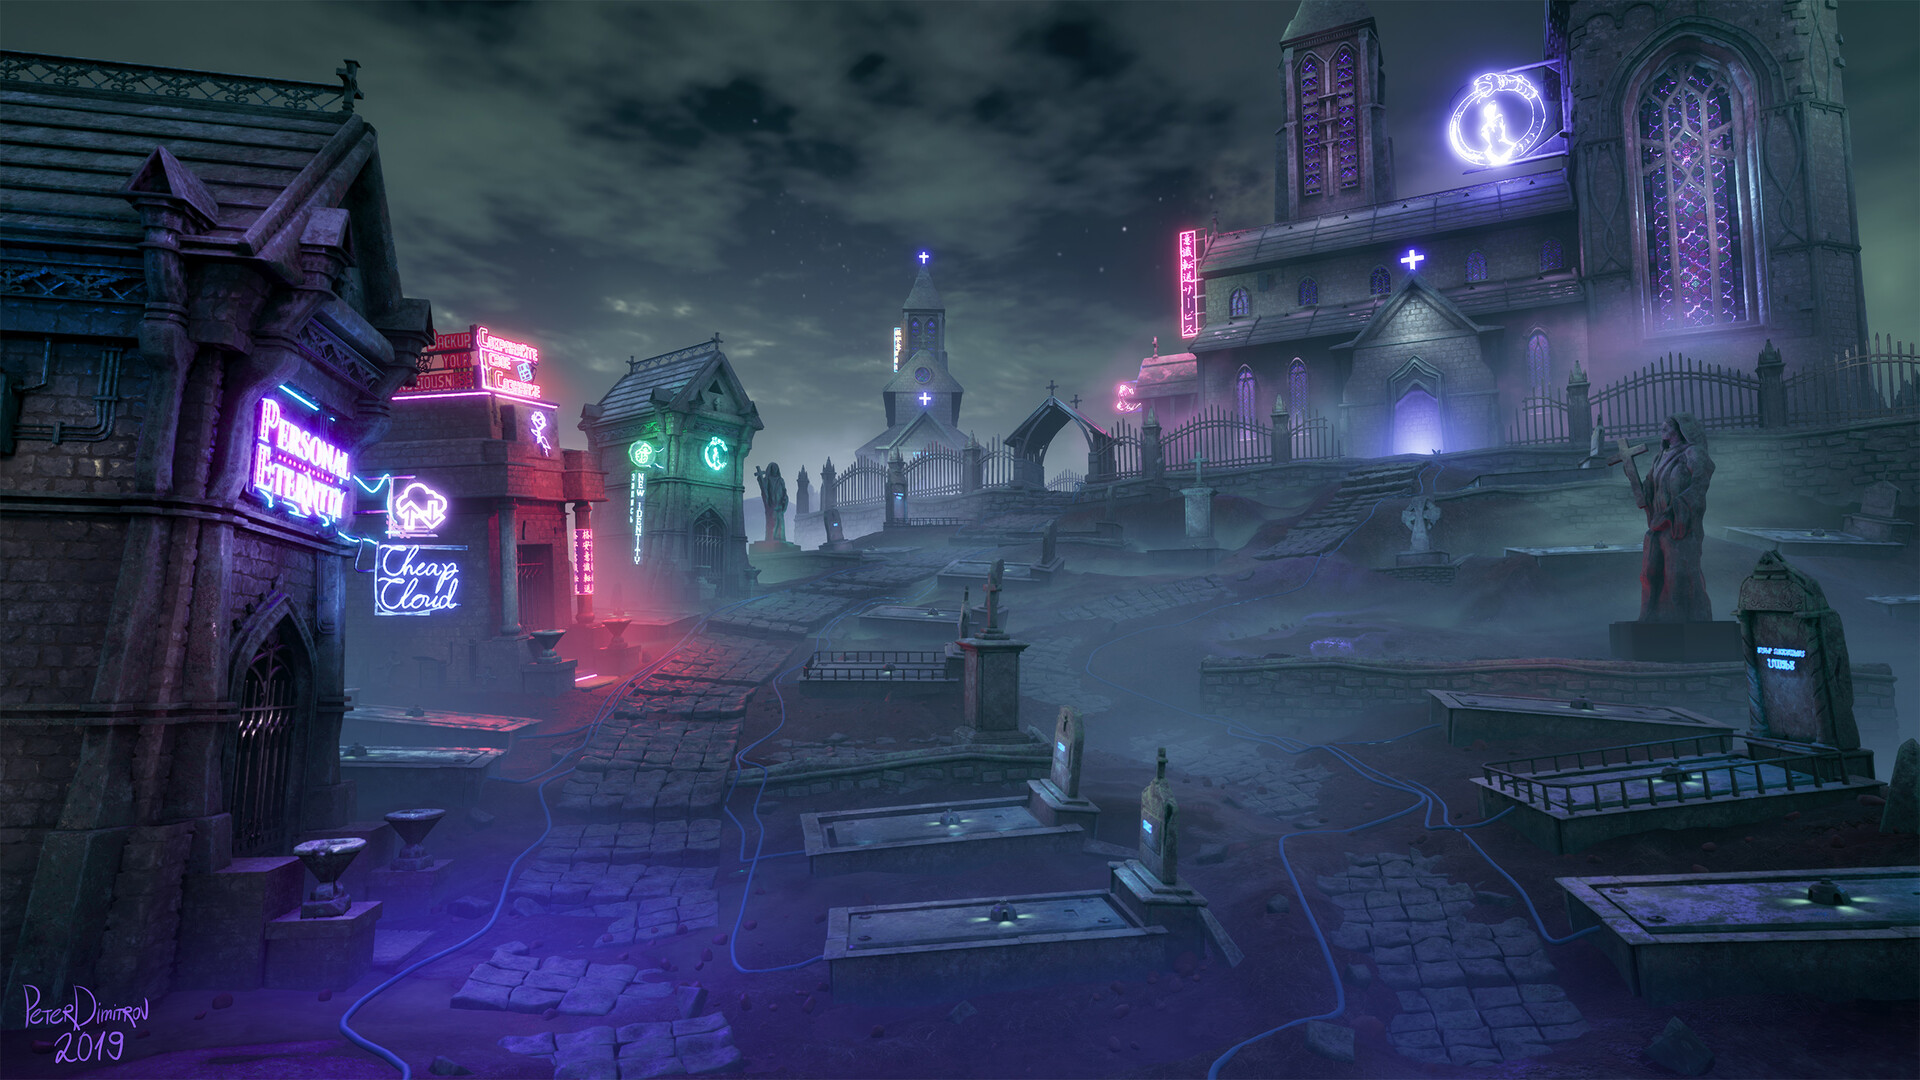 Main camera screenshot. Cobble path curves and leads towards a cathedral at the top of the hill. The cathedral, and some mausoleums around, are all decorated in neon sights and strong electric colors.